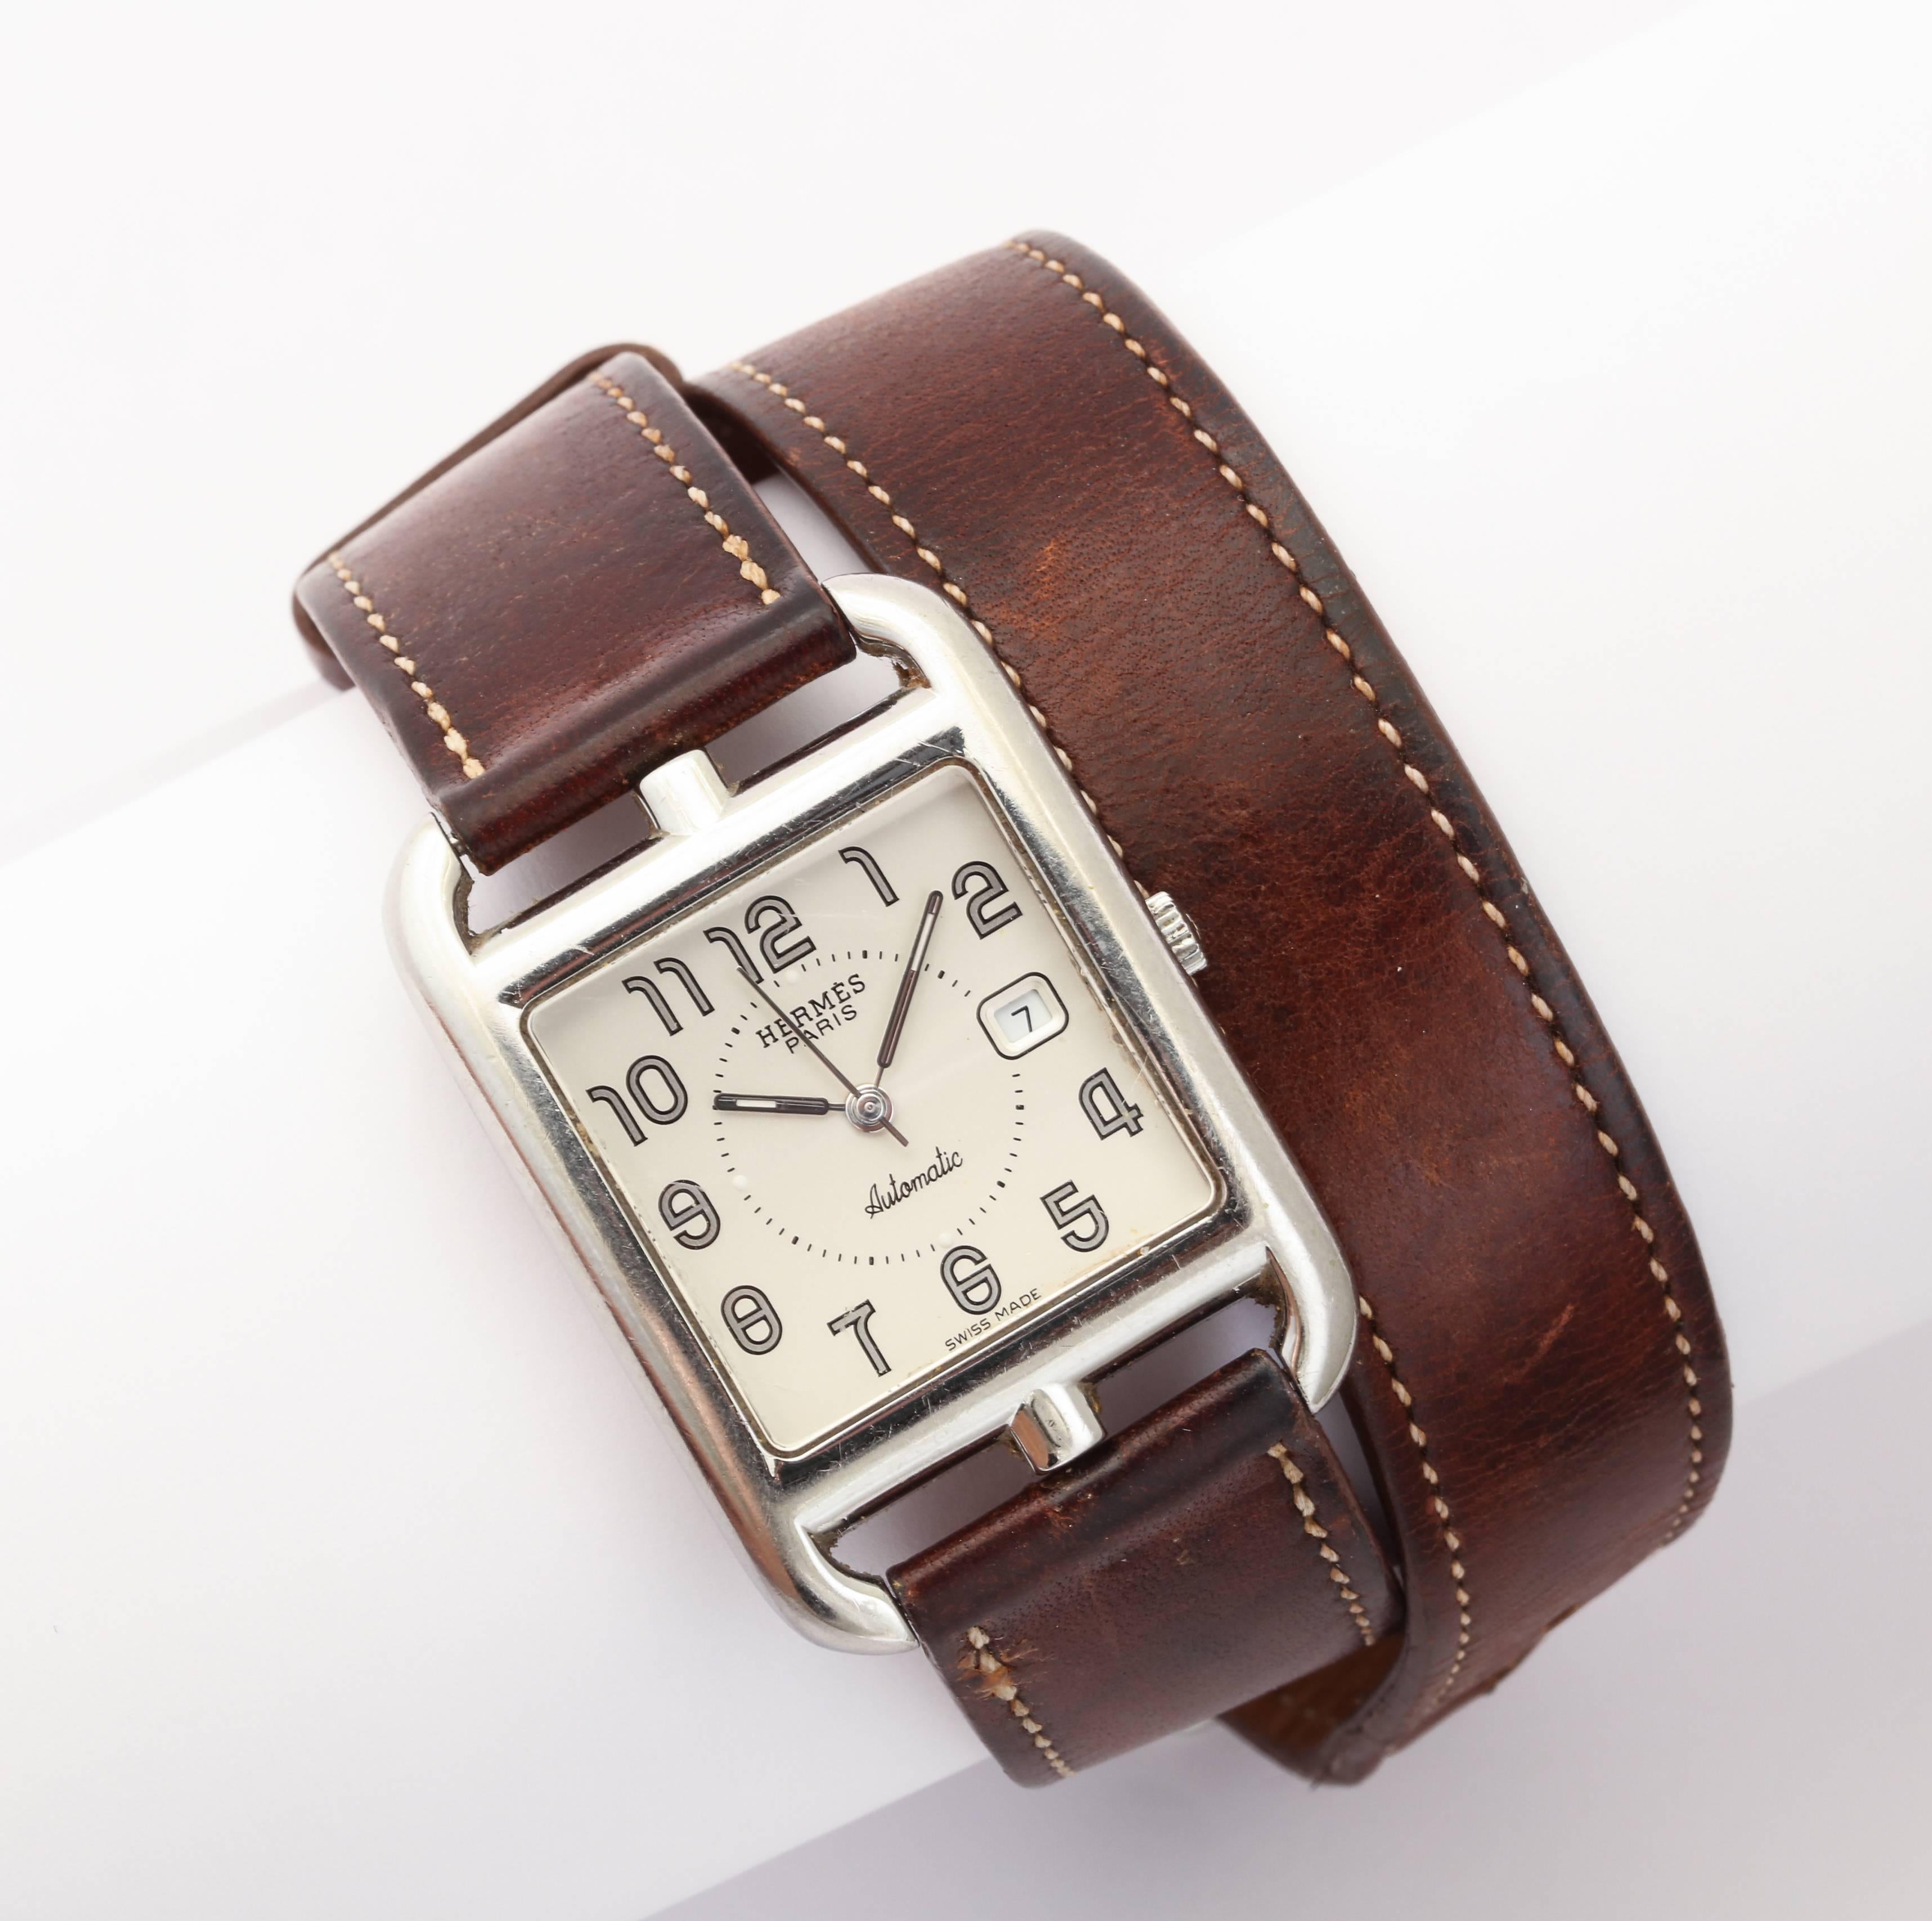 Hermes Cape Cod Automatic Brown Double Strap Watch 1